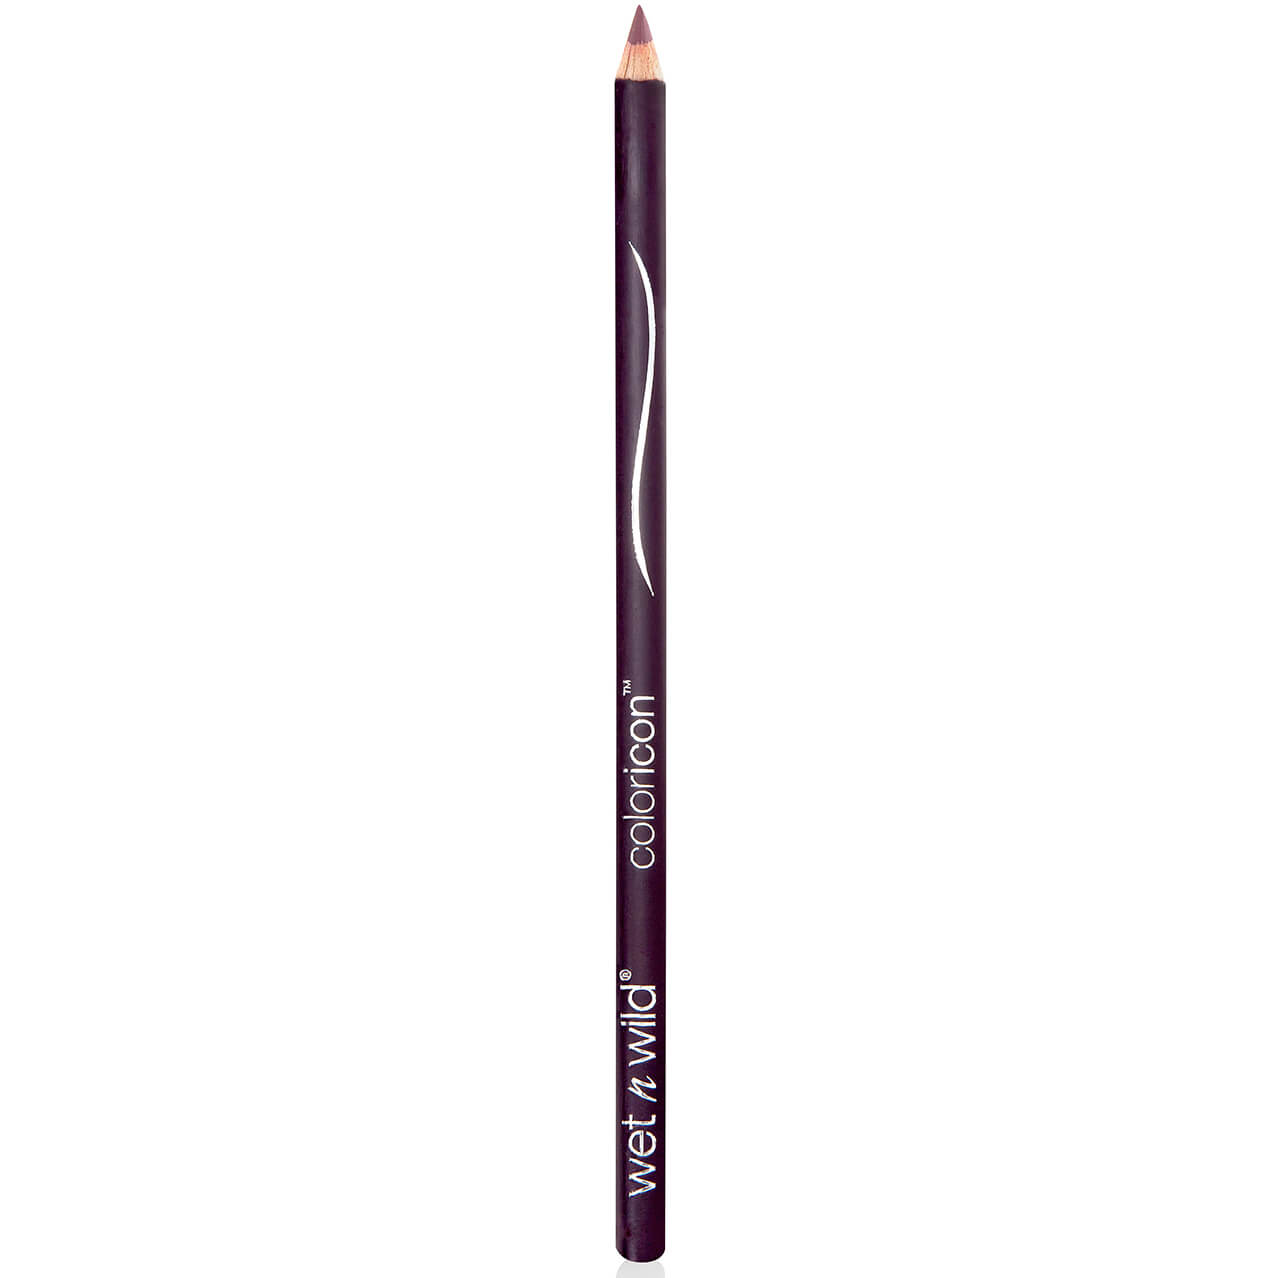 wet n wild coloricon Lipliner Pencil 1.4g (Various Shades) - Plumberry